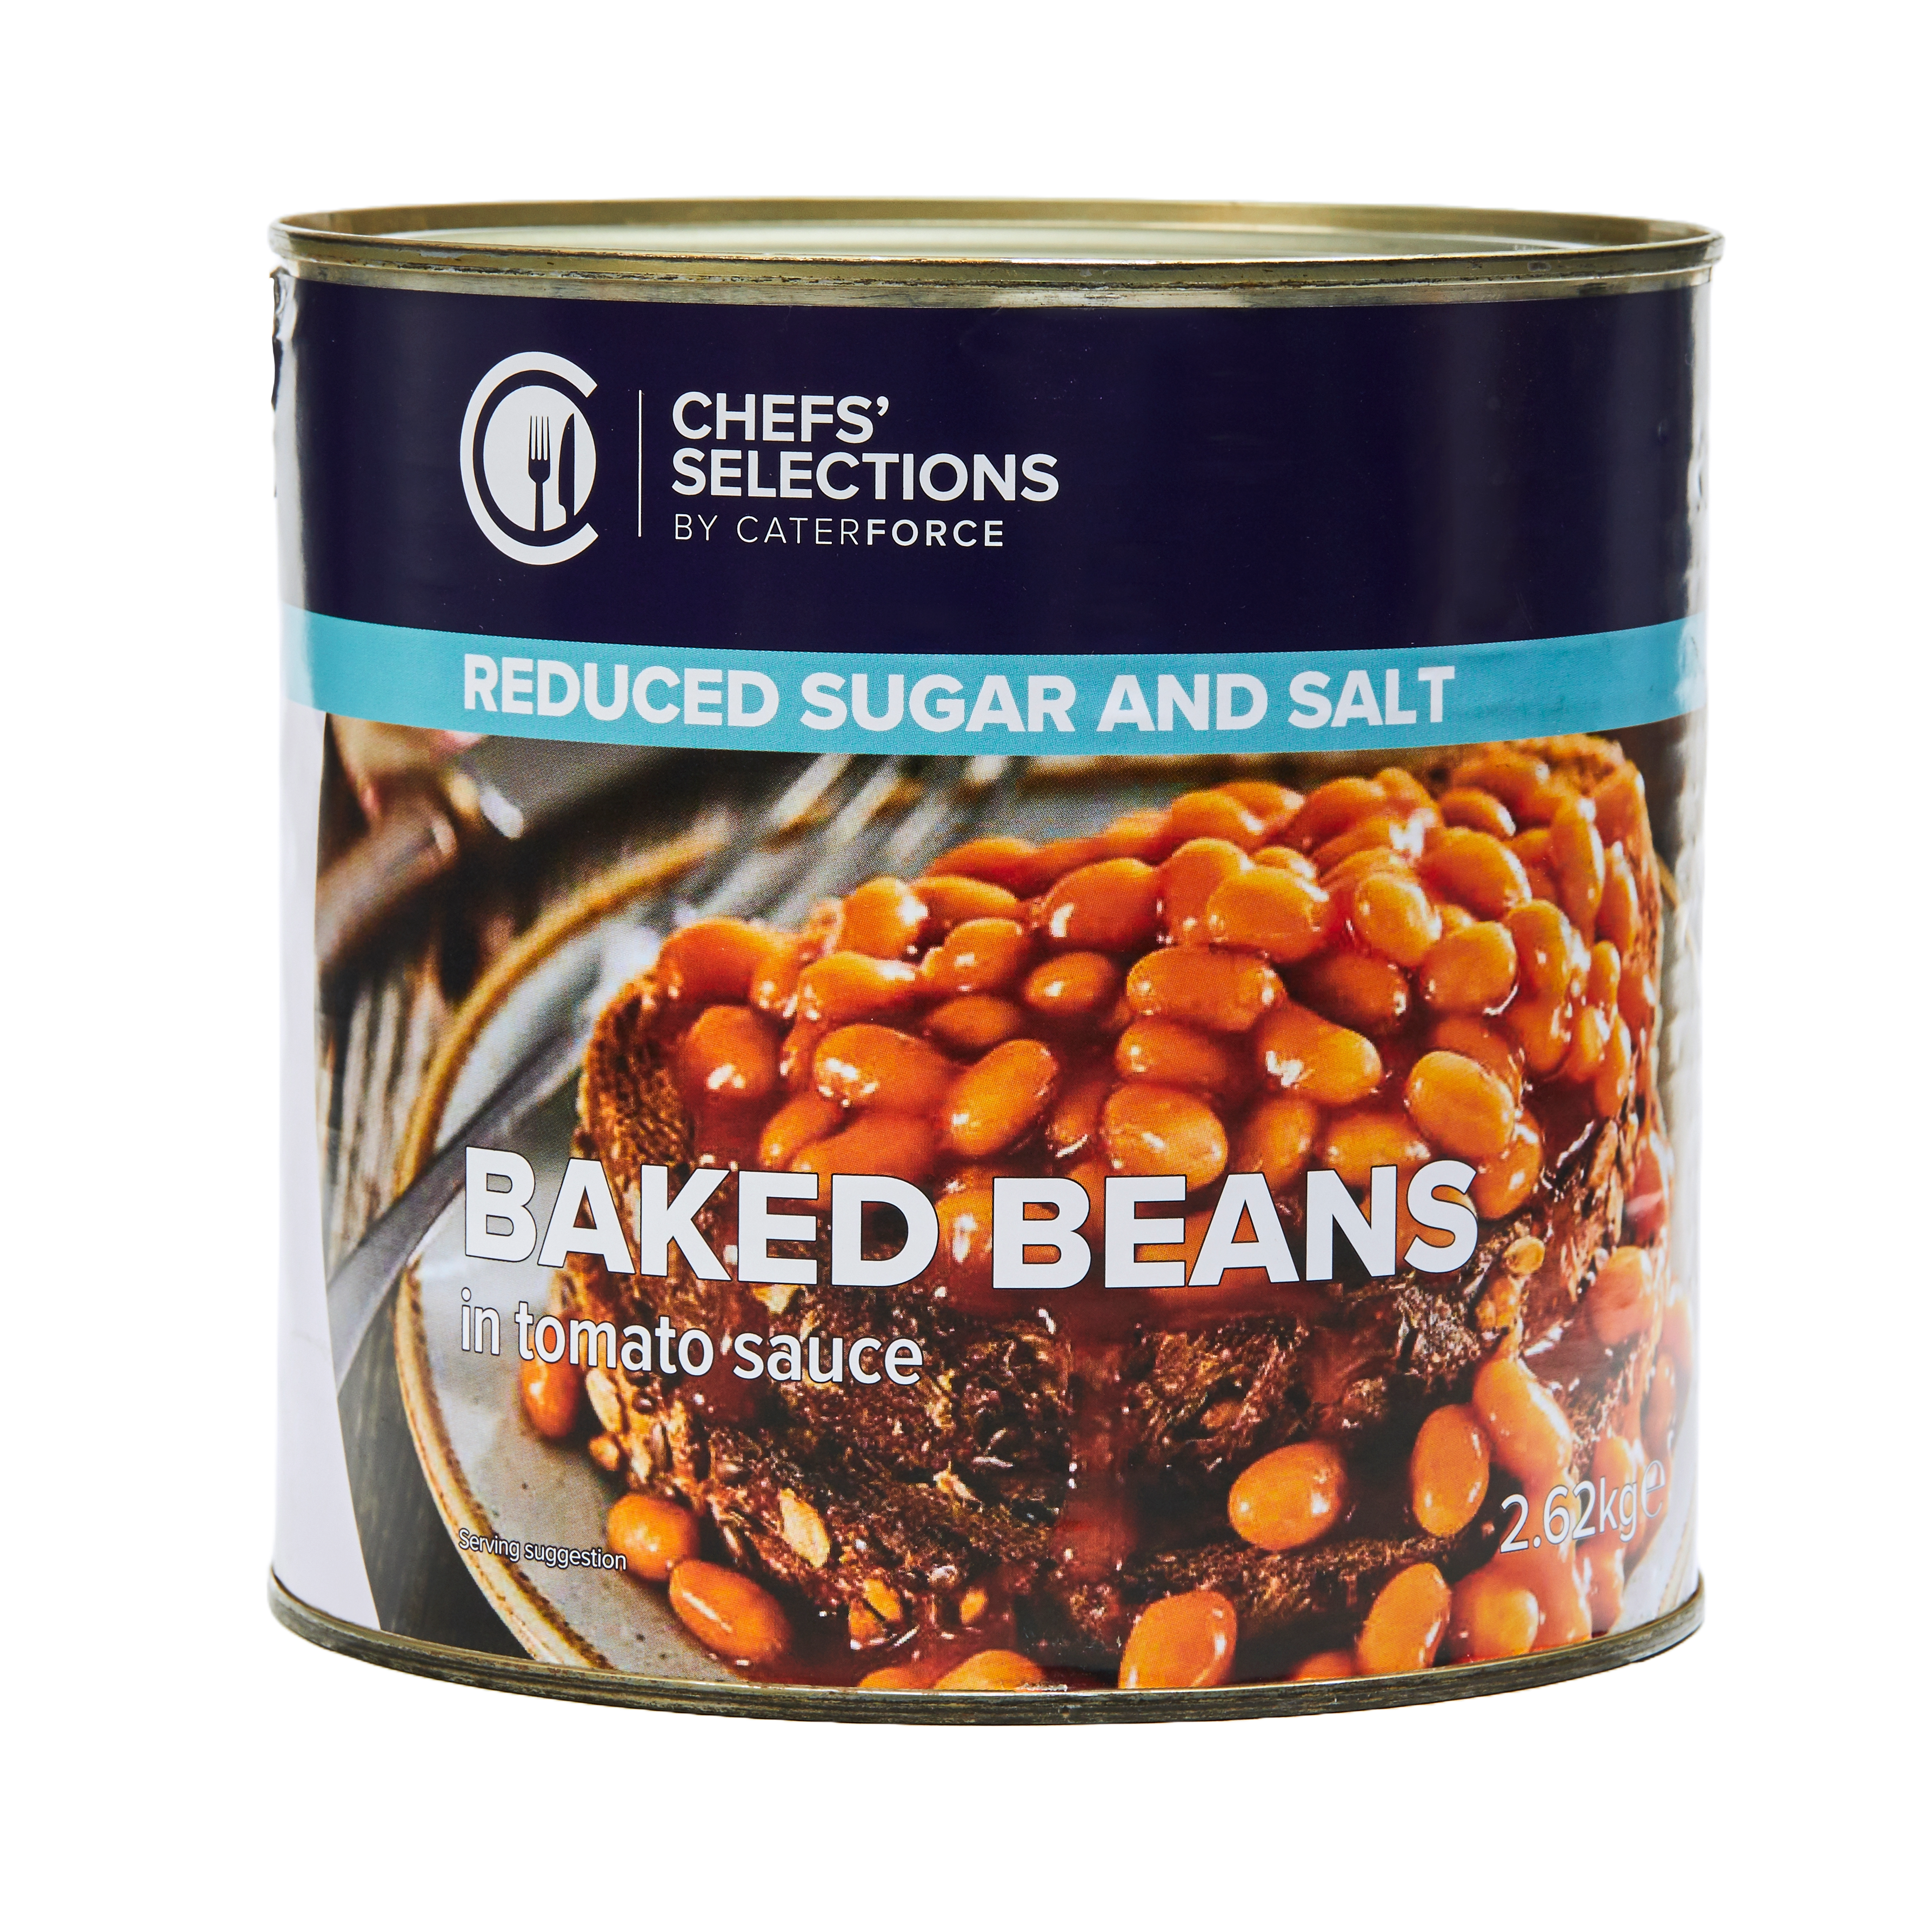 Chefs’ Selections Baked Beans Reduced Salt & Sugar (6 x 2.62kg)